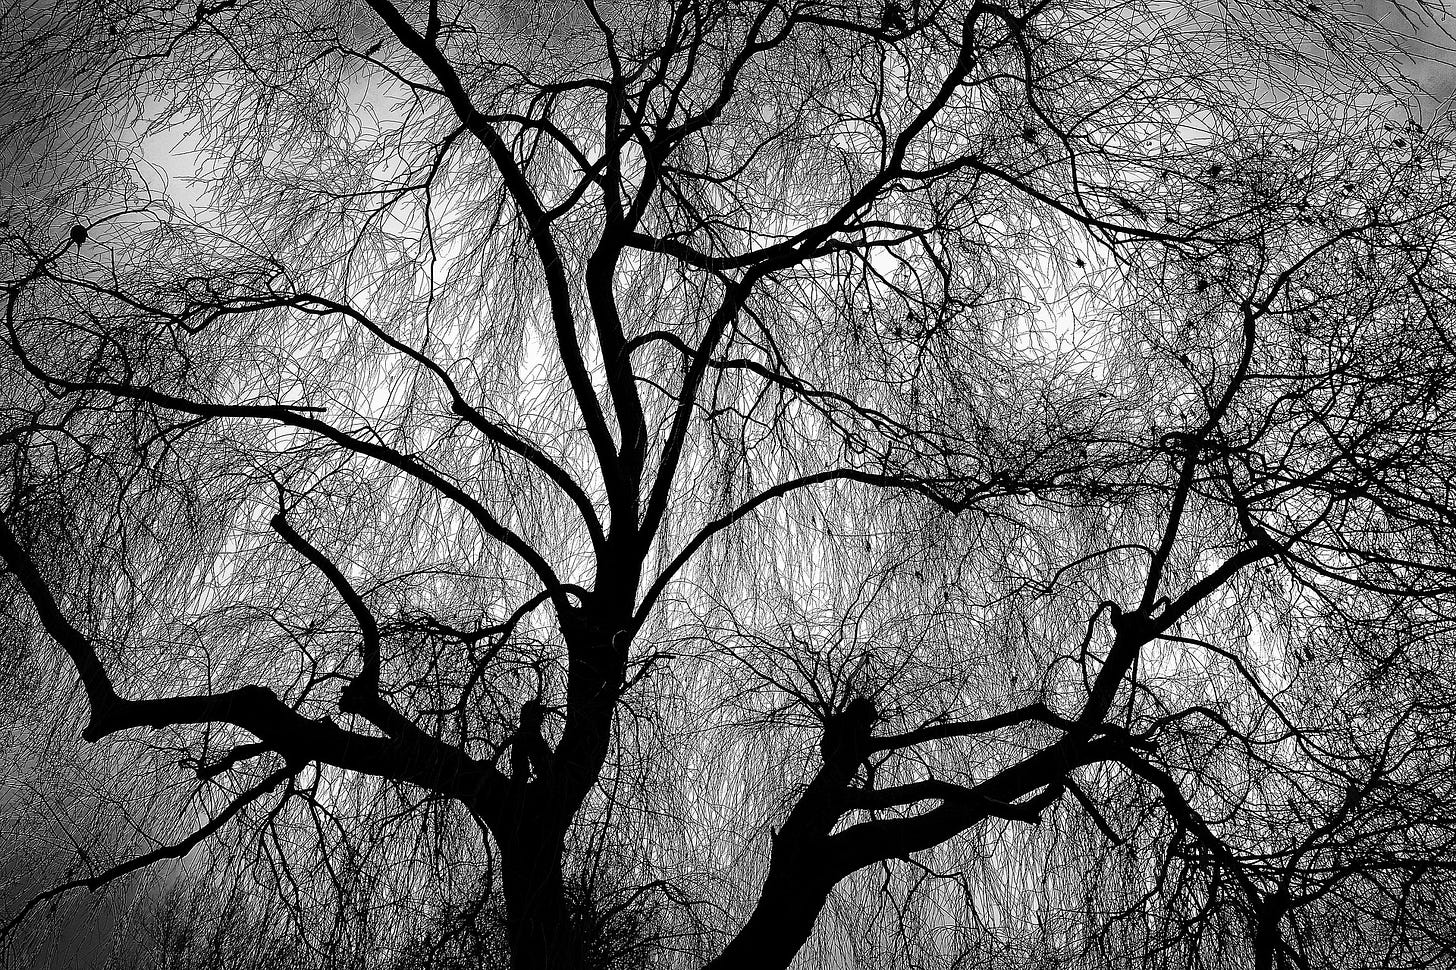 A black and white photo of a weeping willow tree with no leaves on it. The perspective is of a person standing underneath the tree looking up.